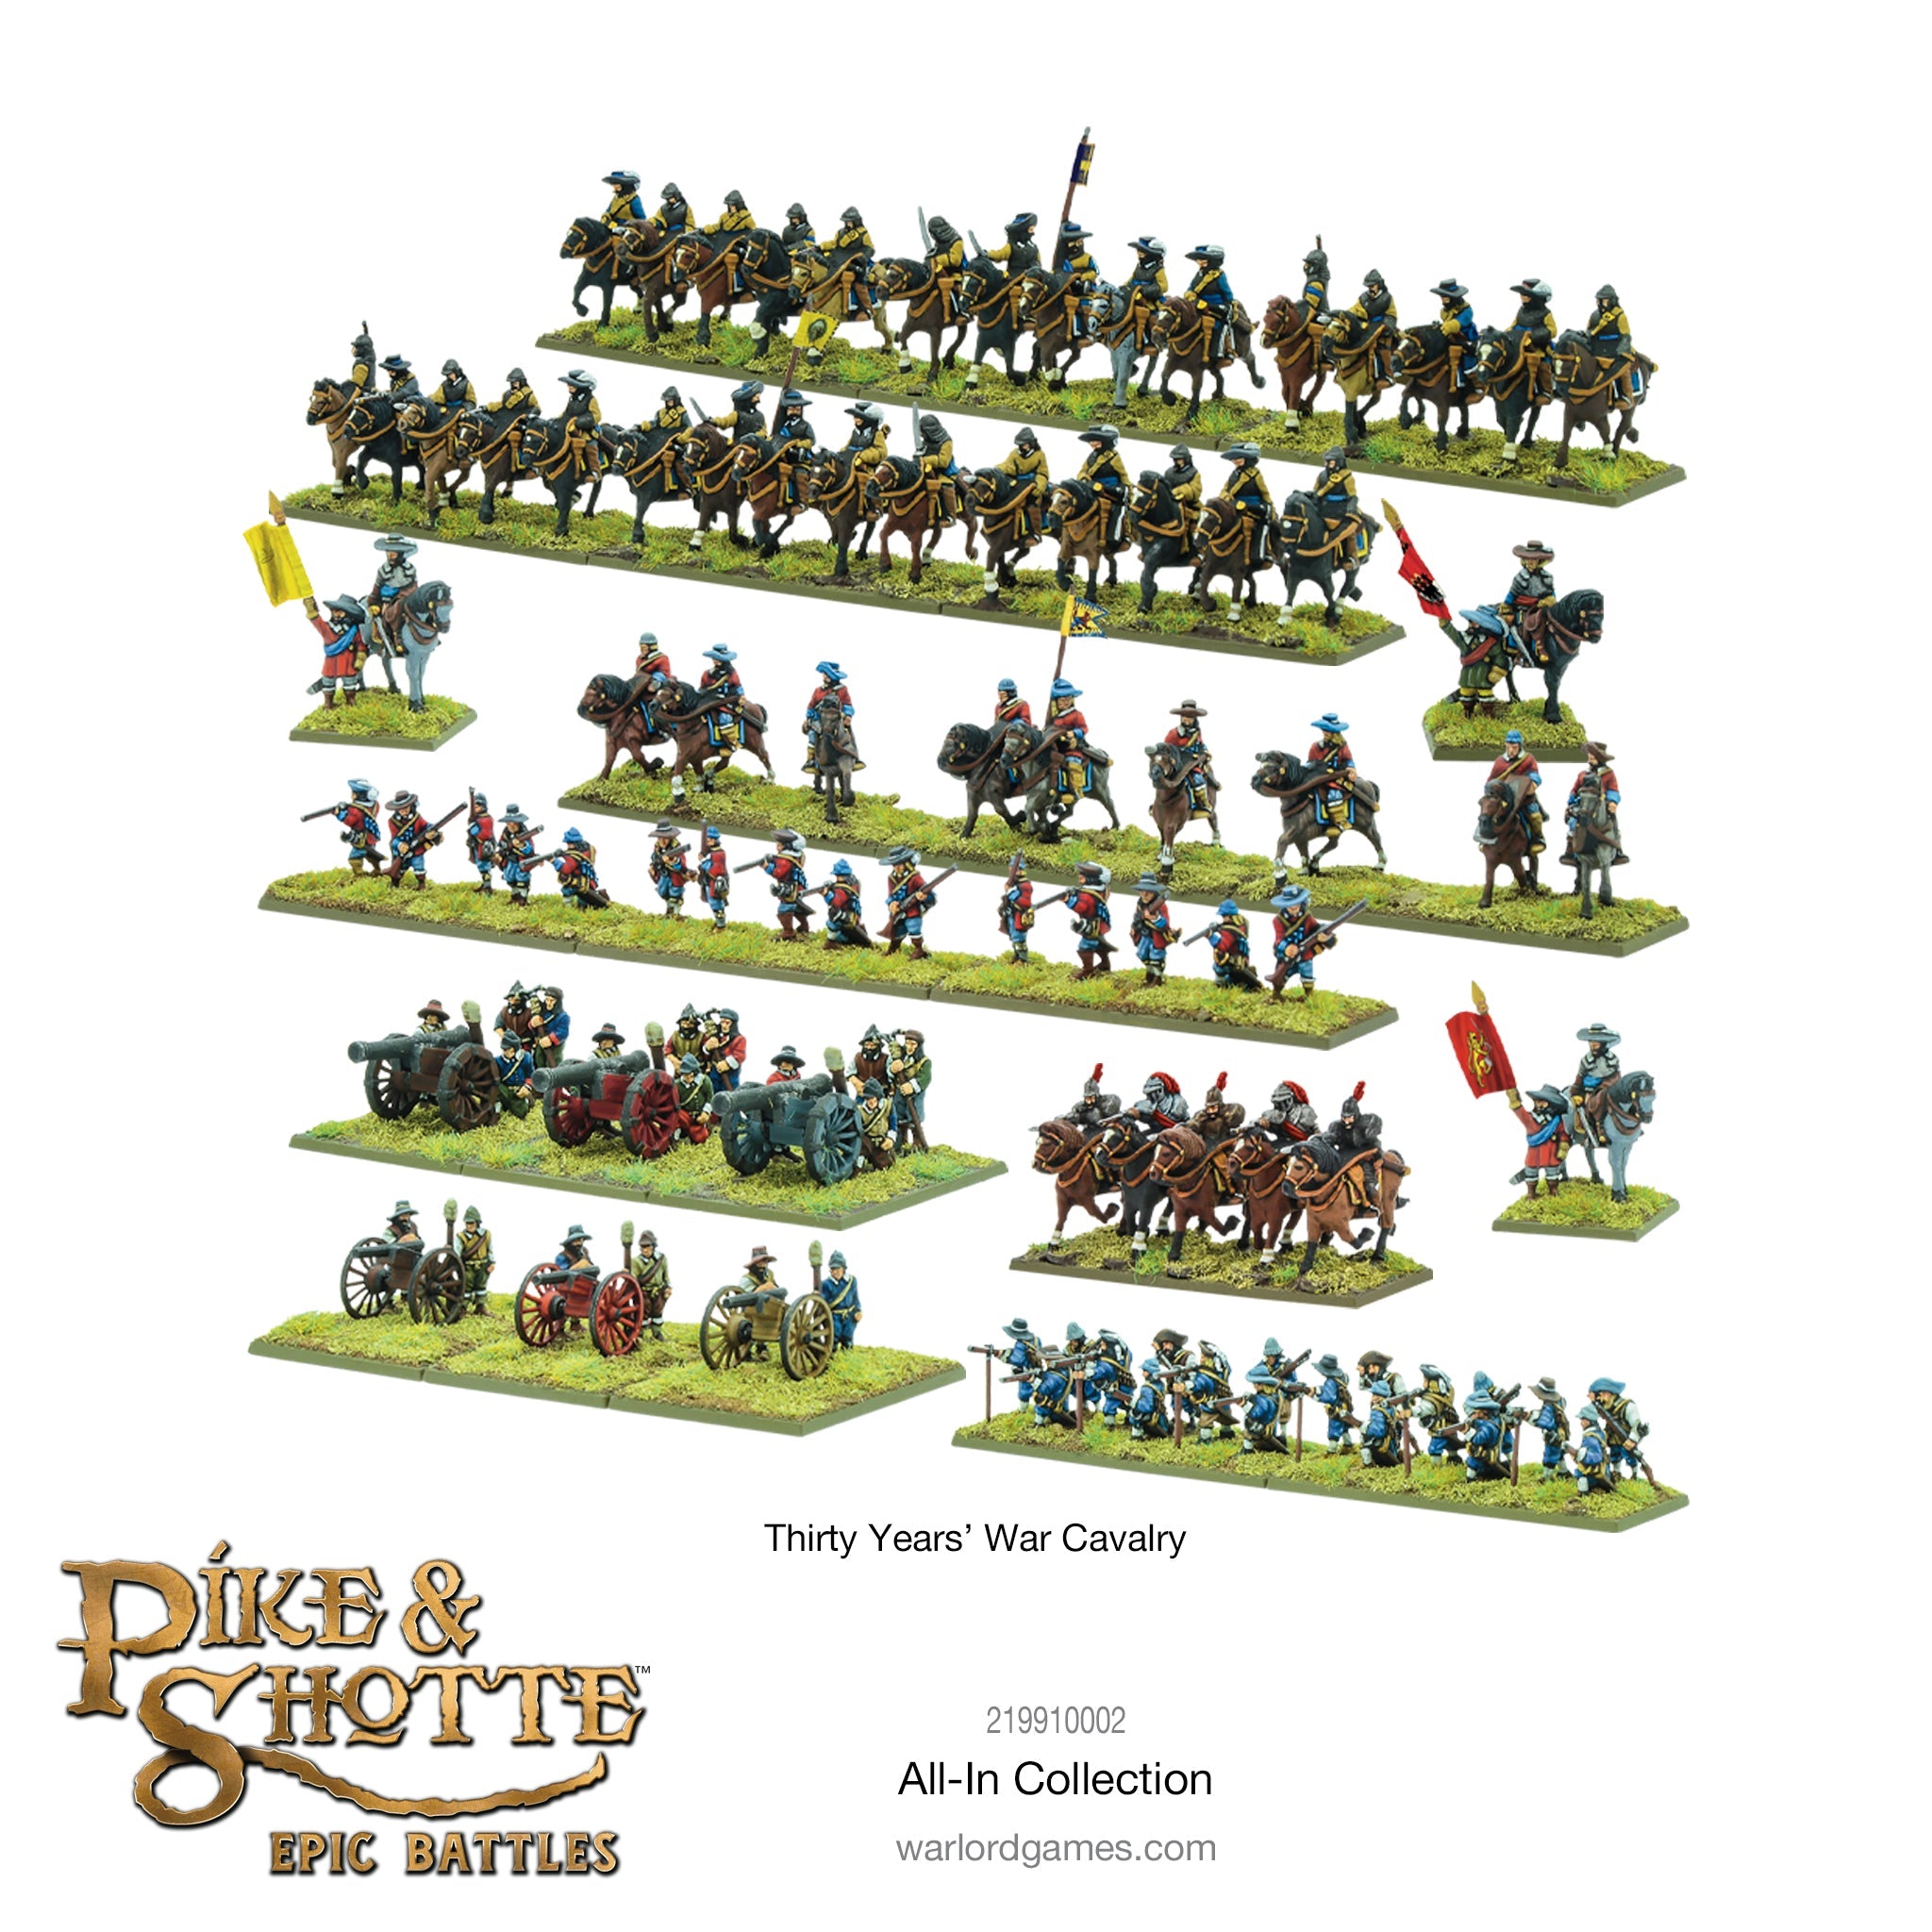 Pike & Shotte Epic Battles - All-In Collection